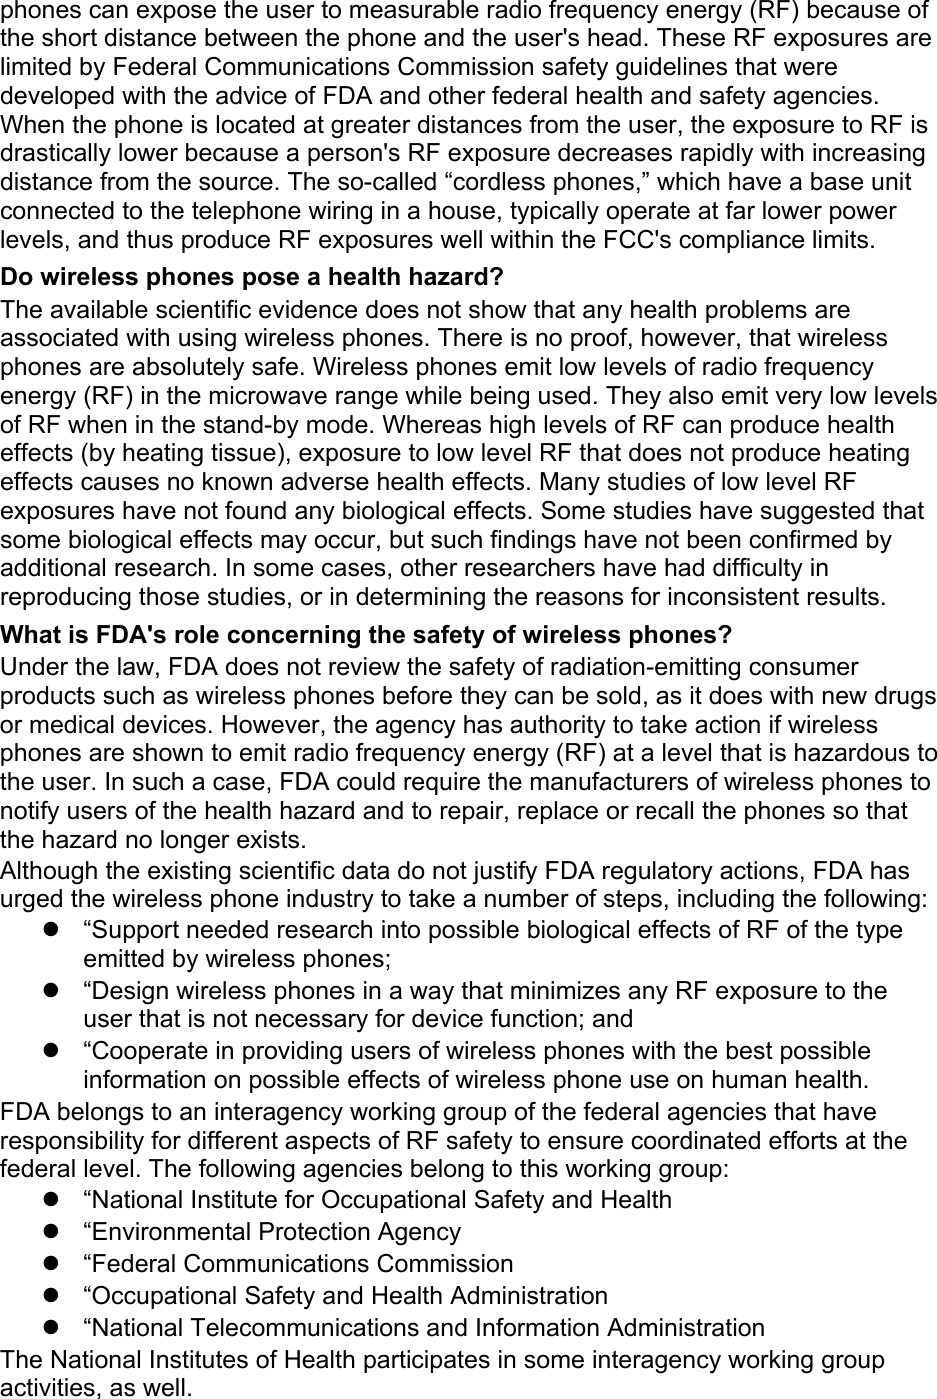 phones can expose the user to measurable radio frequency energy (RF) because of the short distance between the phone and the user&apos;s head. These RF exposures are limited by Federal Communications Commission safety guidelines that were developed with the advice of FDA and other federal health and safety agencies. When the phone is located at greater distances from the user, the exposure to RF is drastically lower because a person&apos;s RF exposure decreases rapidly with increasing distance from the source. The so-called “cordless phones,” which have a base unit connected to the telephone wiring in a house, typically operate at far lower power levels, and thus produce RF exposures well within the FCC&apos;s compliance limits. Do wireless phones pose a health hazard? The available scientific evidence does not show that any health problems are associated with using wireless phones. There is no proof, however, that wireless phones are absolutely safe. Wireless phones emit low levels of radio frequency energy (RF) in the microwave range while being used. They also emit very low levels of RF when in the stand-by mode. Whereas high levels of RF can produce health effects (by heating tissue), exposure to low level RF that does not produce heating effects causes no known adverse health effects. Many studies of low level RF exposures have not found any biological effects. Some studies have suggested that some biological effects may occur, but such findings have not been confirmed by additional research. In some cases, other researchers have had difficulty in reproducing those studies, or in determining the reasons for inconsistent results. What is FDA&apos;s role concerning the safety of wireless phones? Under the law, FDA does not review the safety of radiation-emitting consumer products such as wireless phones before they can be sold, as it does with new drugs or medical devices. However, the agency has authority to take action if wireless phones are shown to emit radio frequency energy (RF) at a level that is hazardous to the user. In such a case, FDA could require the manufacturers of wireless phones to notify users of the health hazard and to repair, replace or recall the phones so that the hazard no longer exists. Although the existing scientific data do not justify FDA regulatory actions, FDA has urged the wireless phone industry to take a number of steps, including the following:   “Support needed research into possible biological effects of RF of the type emitted by wireless phones;   “Design wireless phones in a way that minimizes any RF exposure to the user that is not necessary for device function; and   “Cooperate in providing users of wireless phones with the best possible information on possible effects of wireless phone use on human health. FDA belongs to an interagency working group of the federal agencies that have responsibility for different aspects of RF safety to ensure coordinated efforts at the federal level. The following agencies belong to this working group:   “National Institute for Occupational Safety and Health   “Environmental Protection Agency   “Federal Communications Commission   “Occupational Safety and Health Administration  “National Telecommunications and Information Administration The National Institutes of Health participates in some interagency working group activities, as well. 